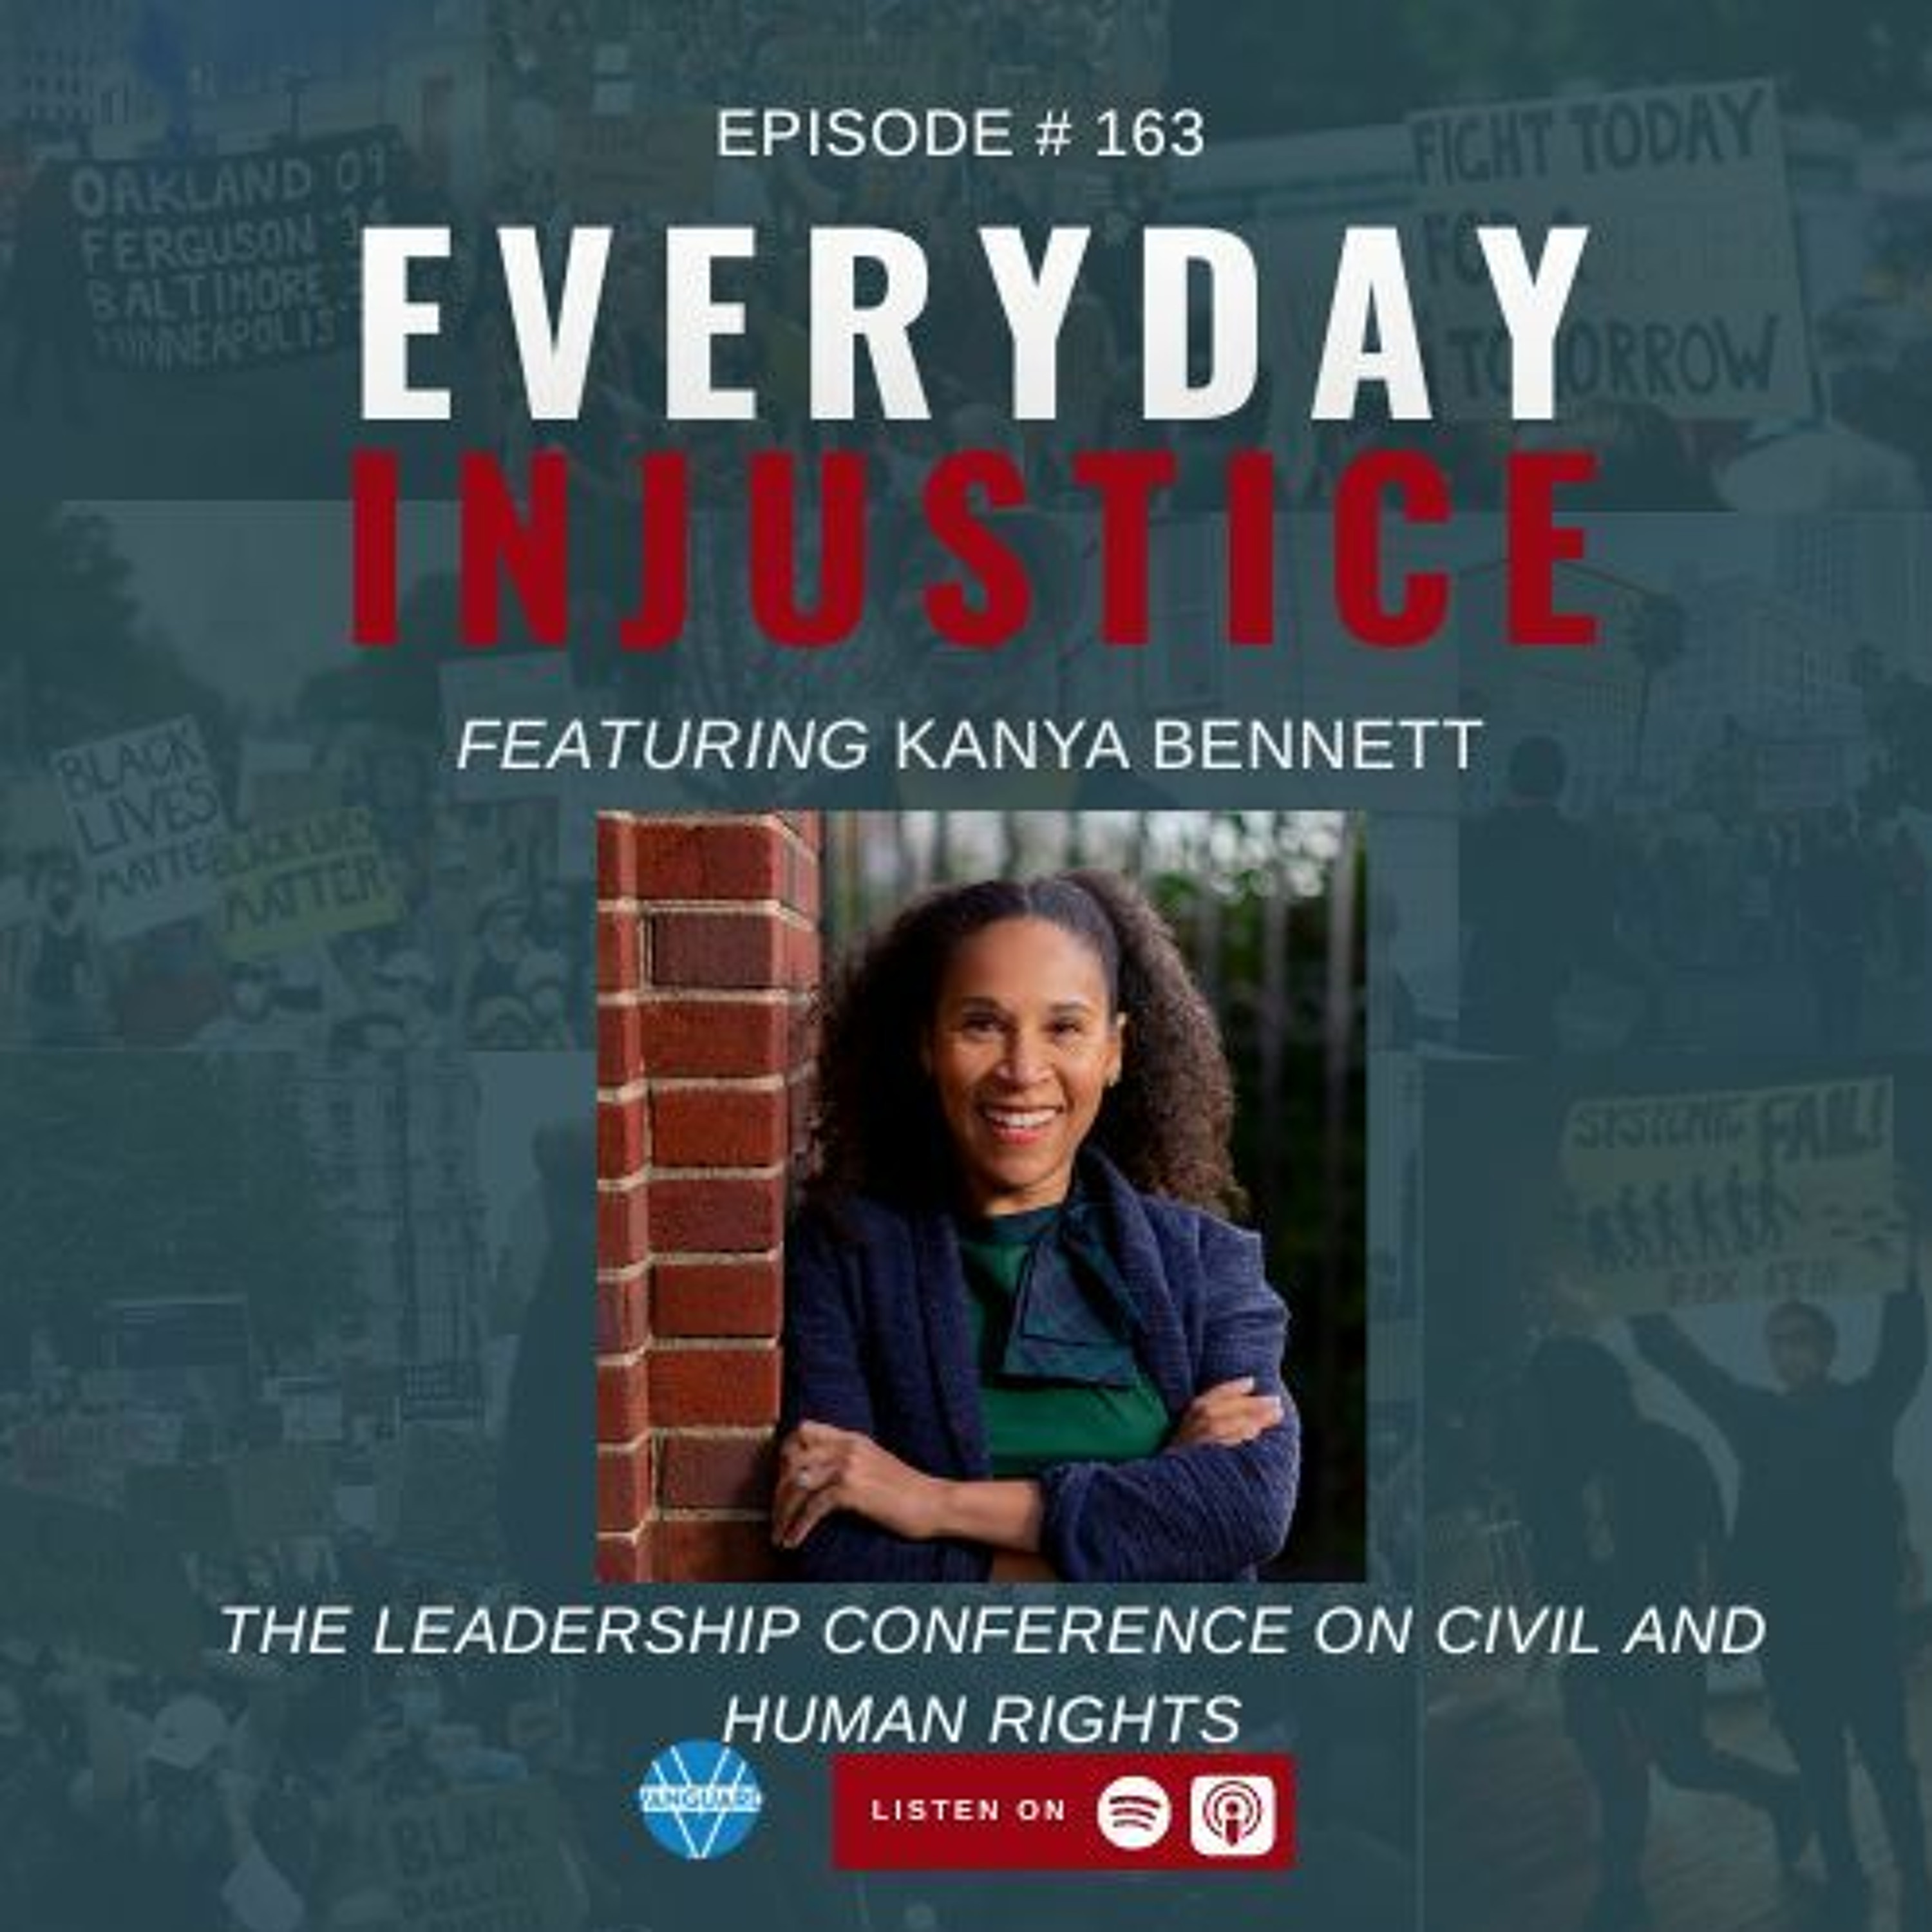 Everyday Injustice Episode 163: Kanya Bennett & Leadership Conference on Civil and Human Rights